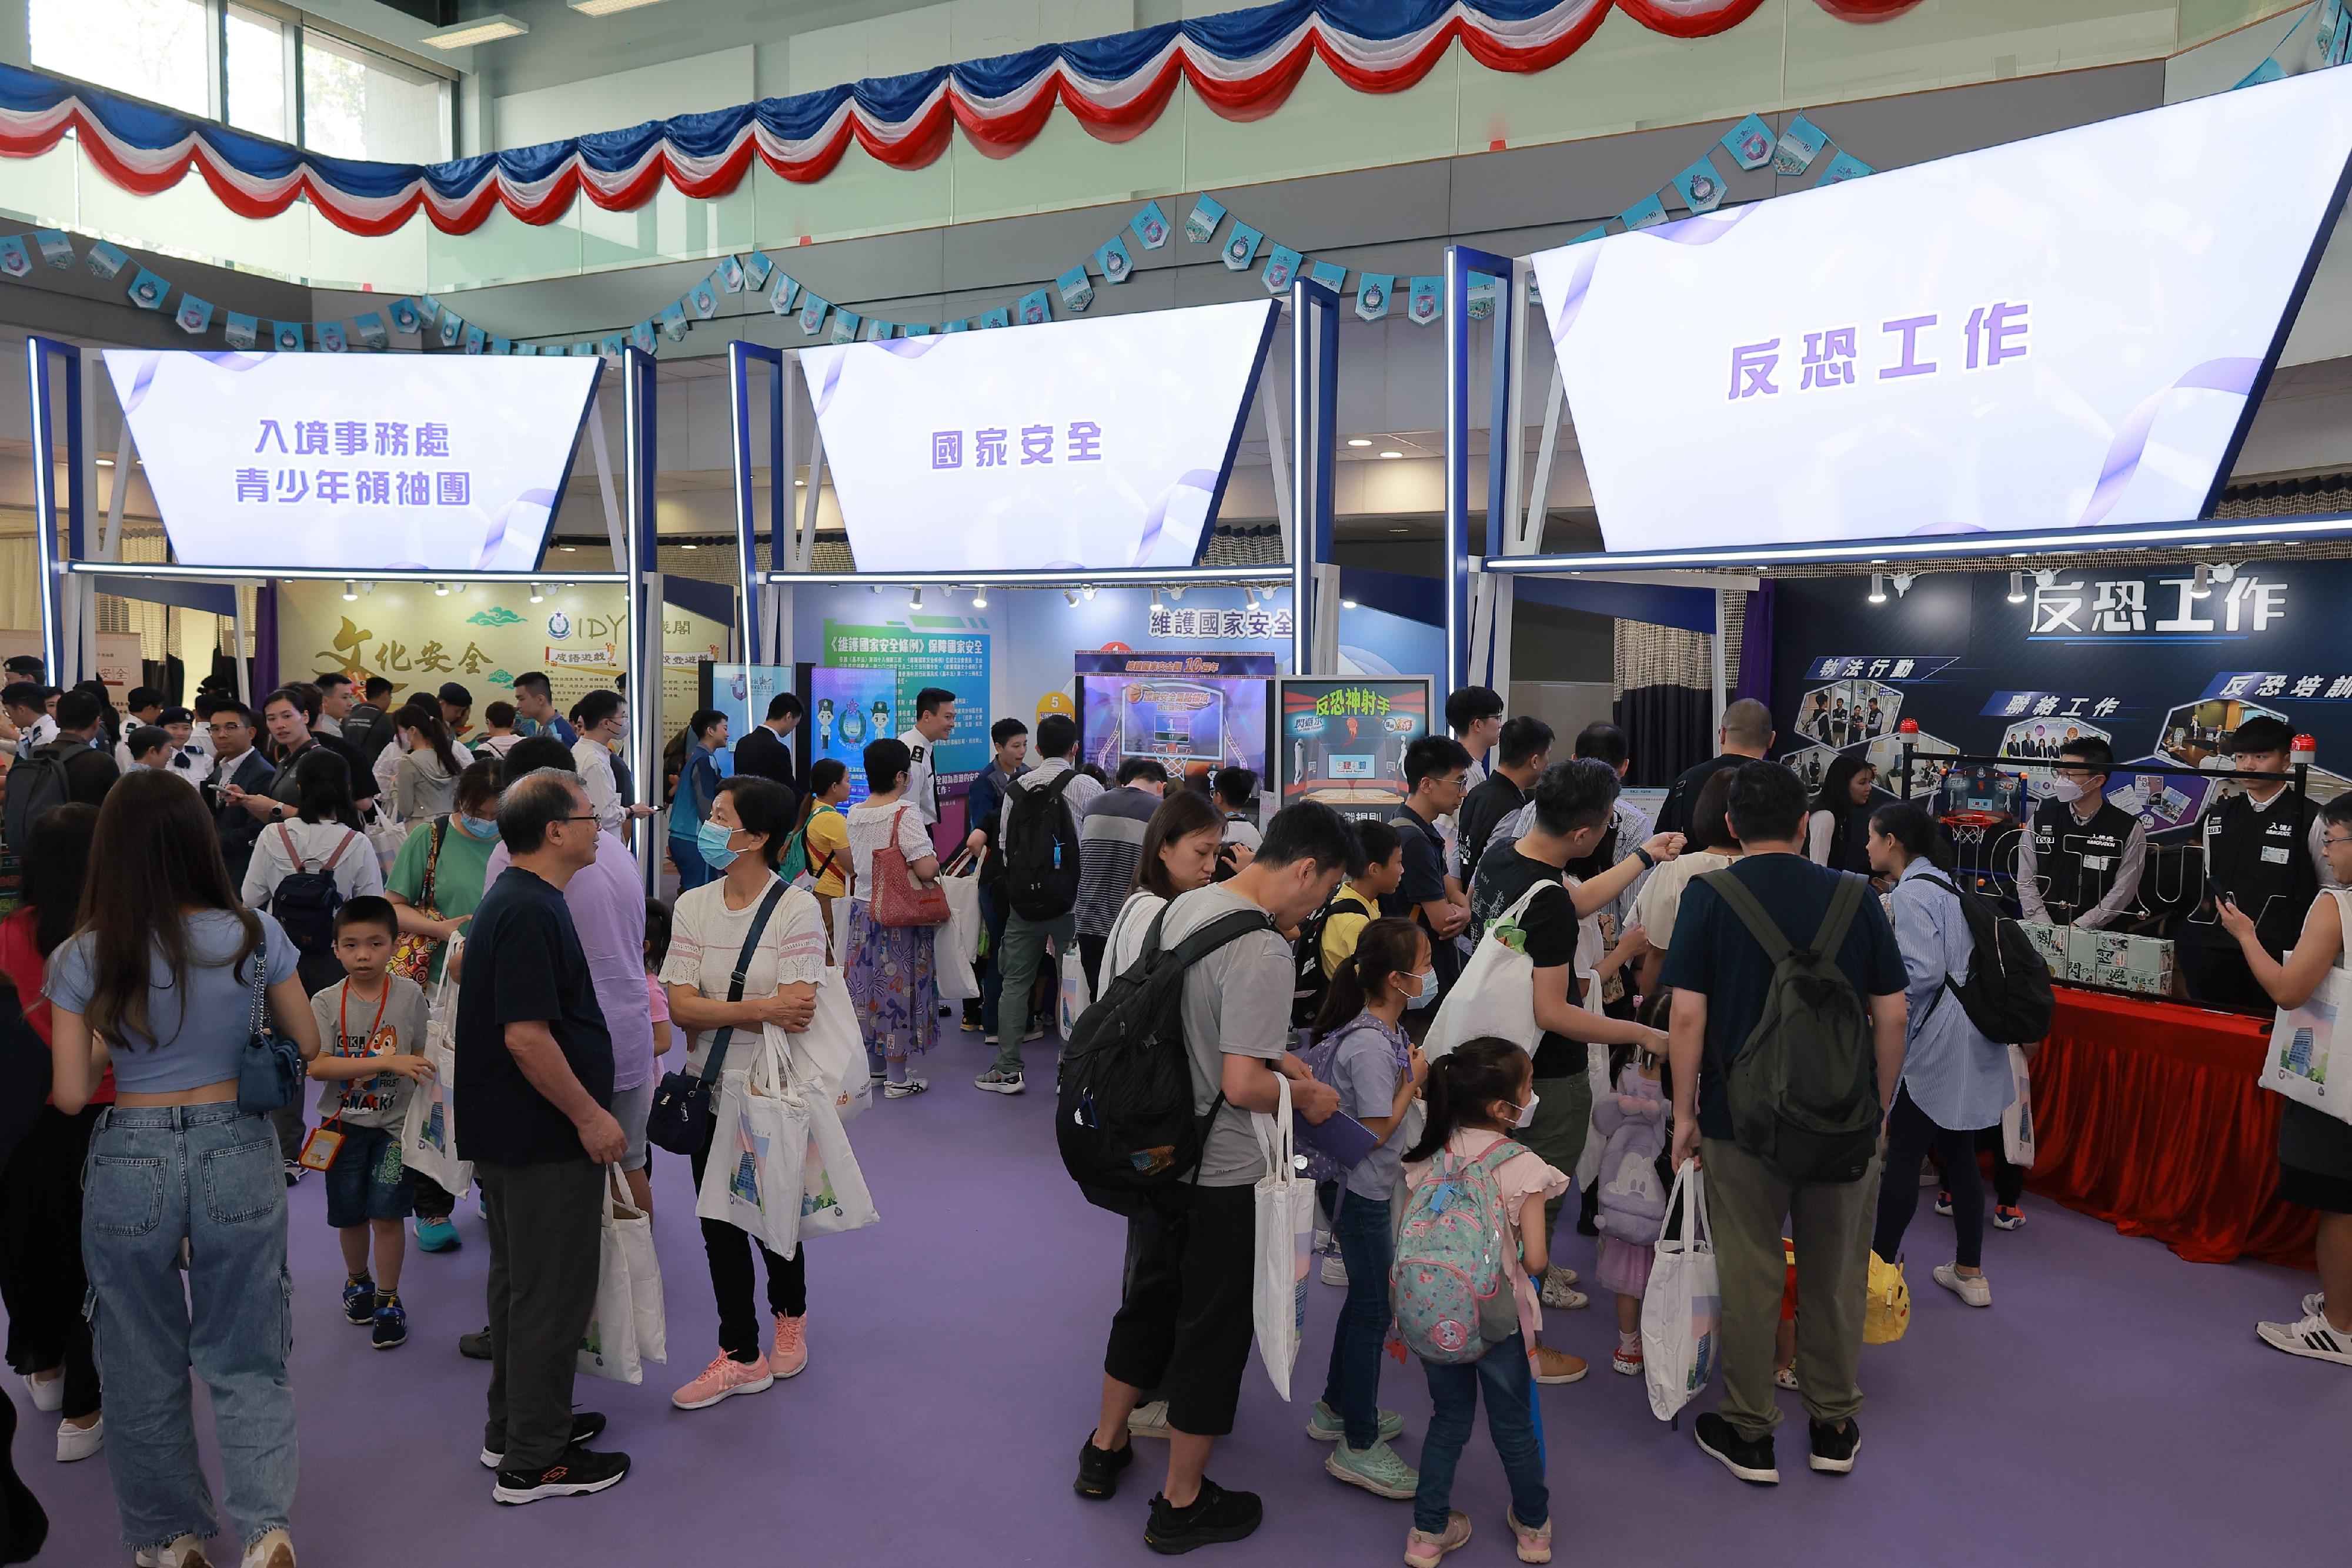 To support the National Security Education Day, the Immigration Service Institute of Training and Development held an open day today (April 13). Photo shows members of the public visiting an exhibition booth.